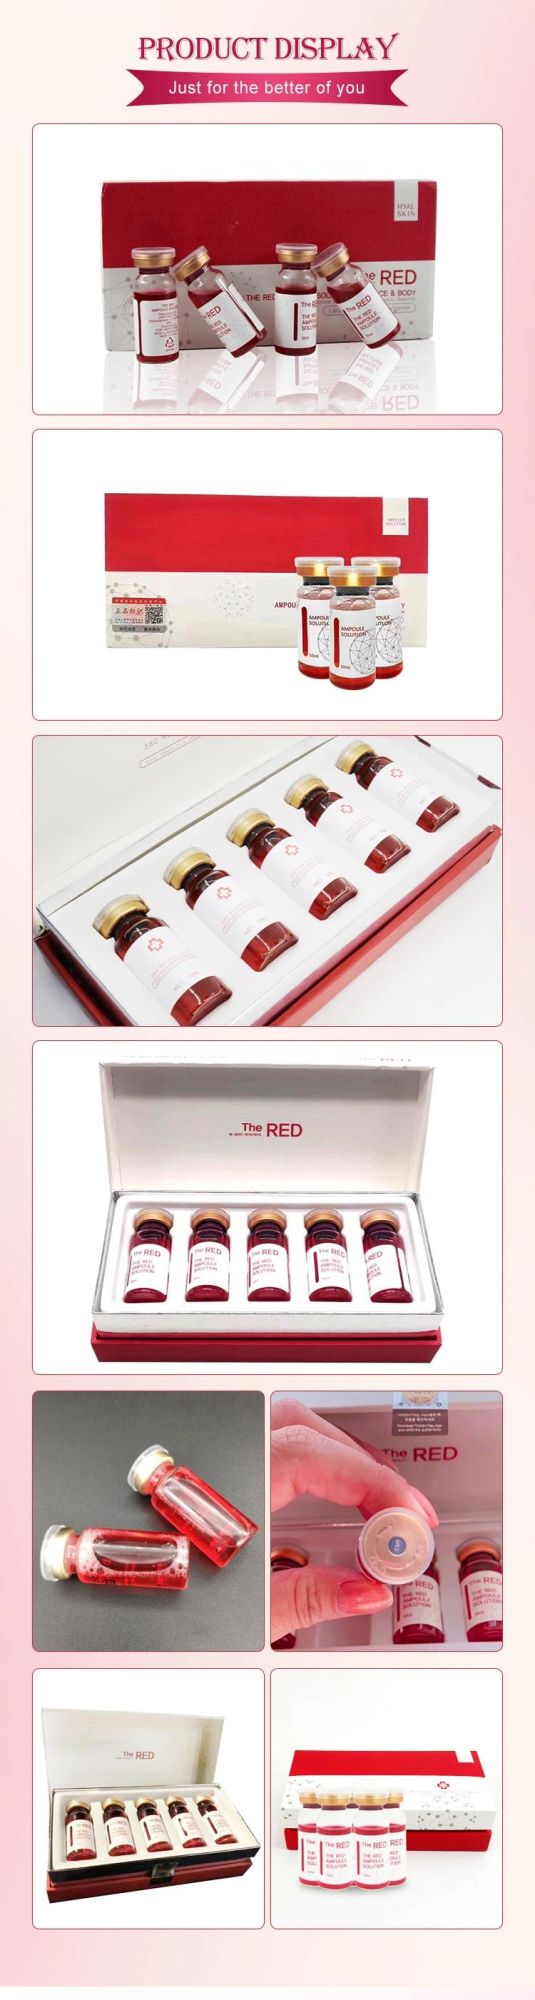 High Quality Weight Loss Liquid Fat Dissolving Injection Ingredient Red Ampoule Solution